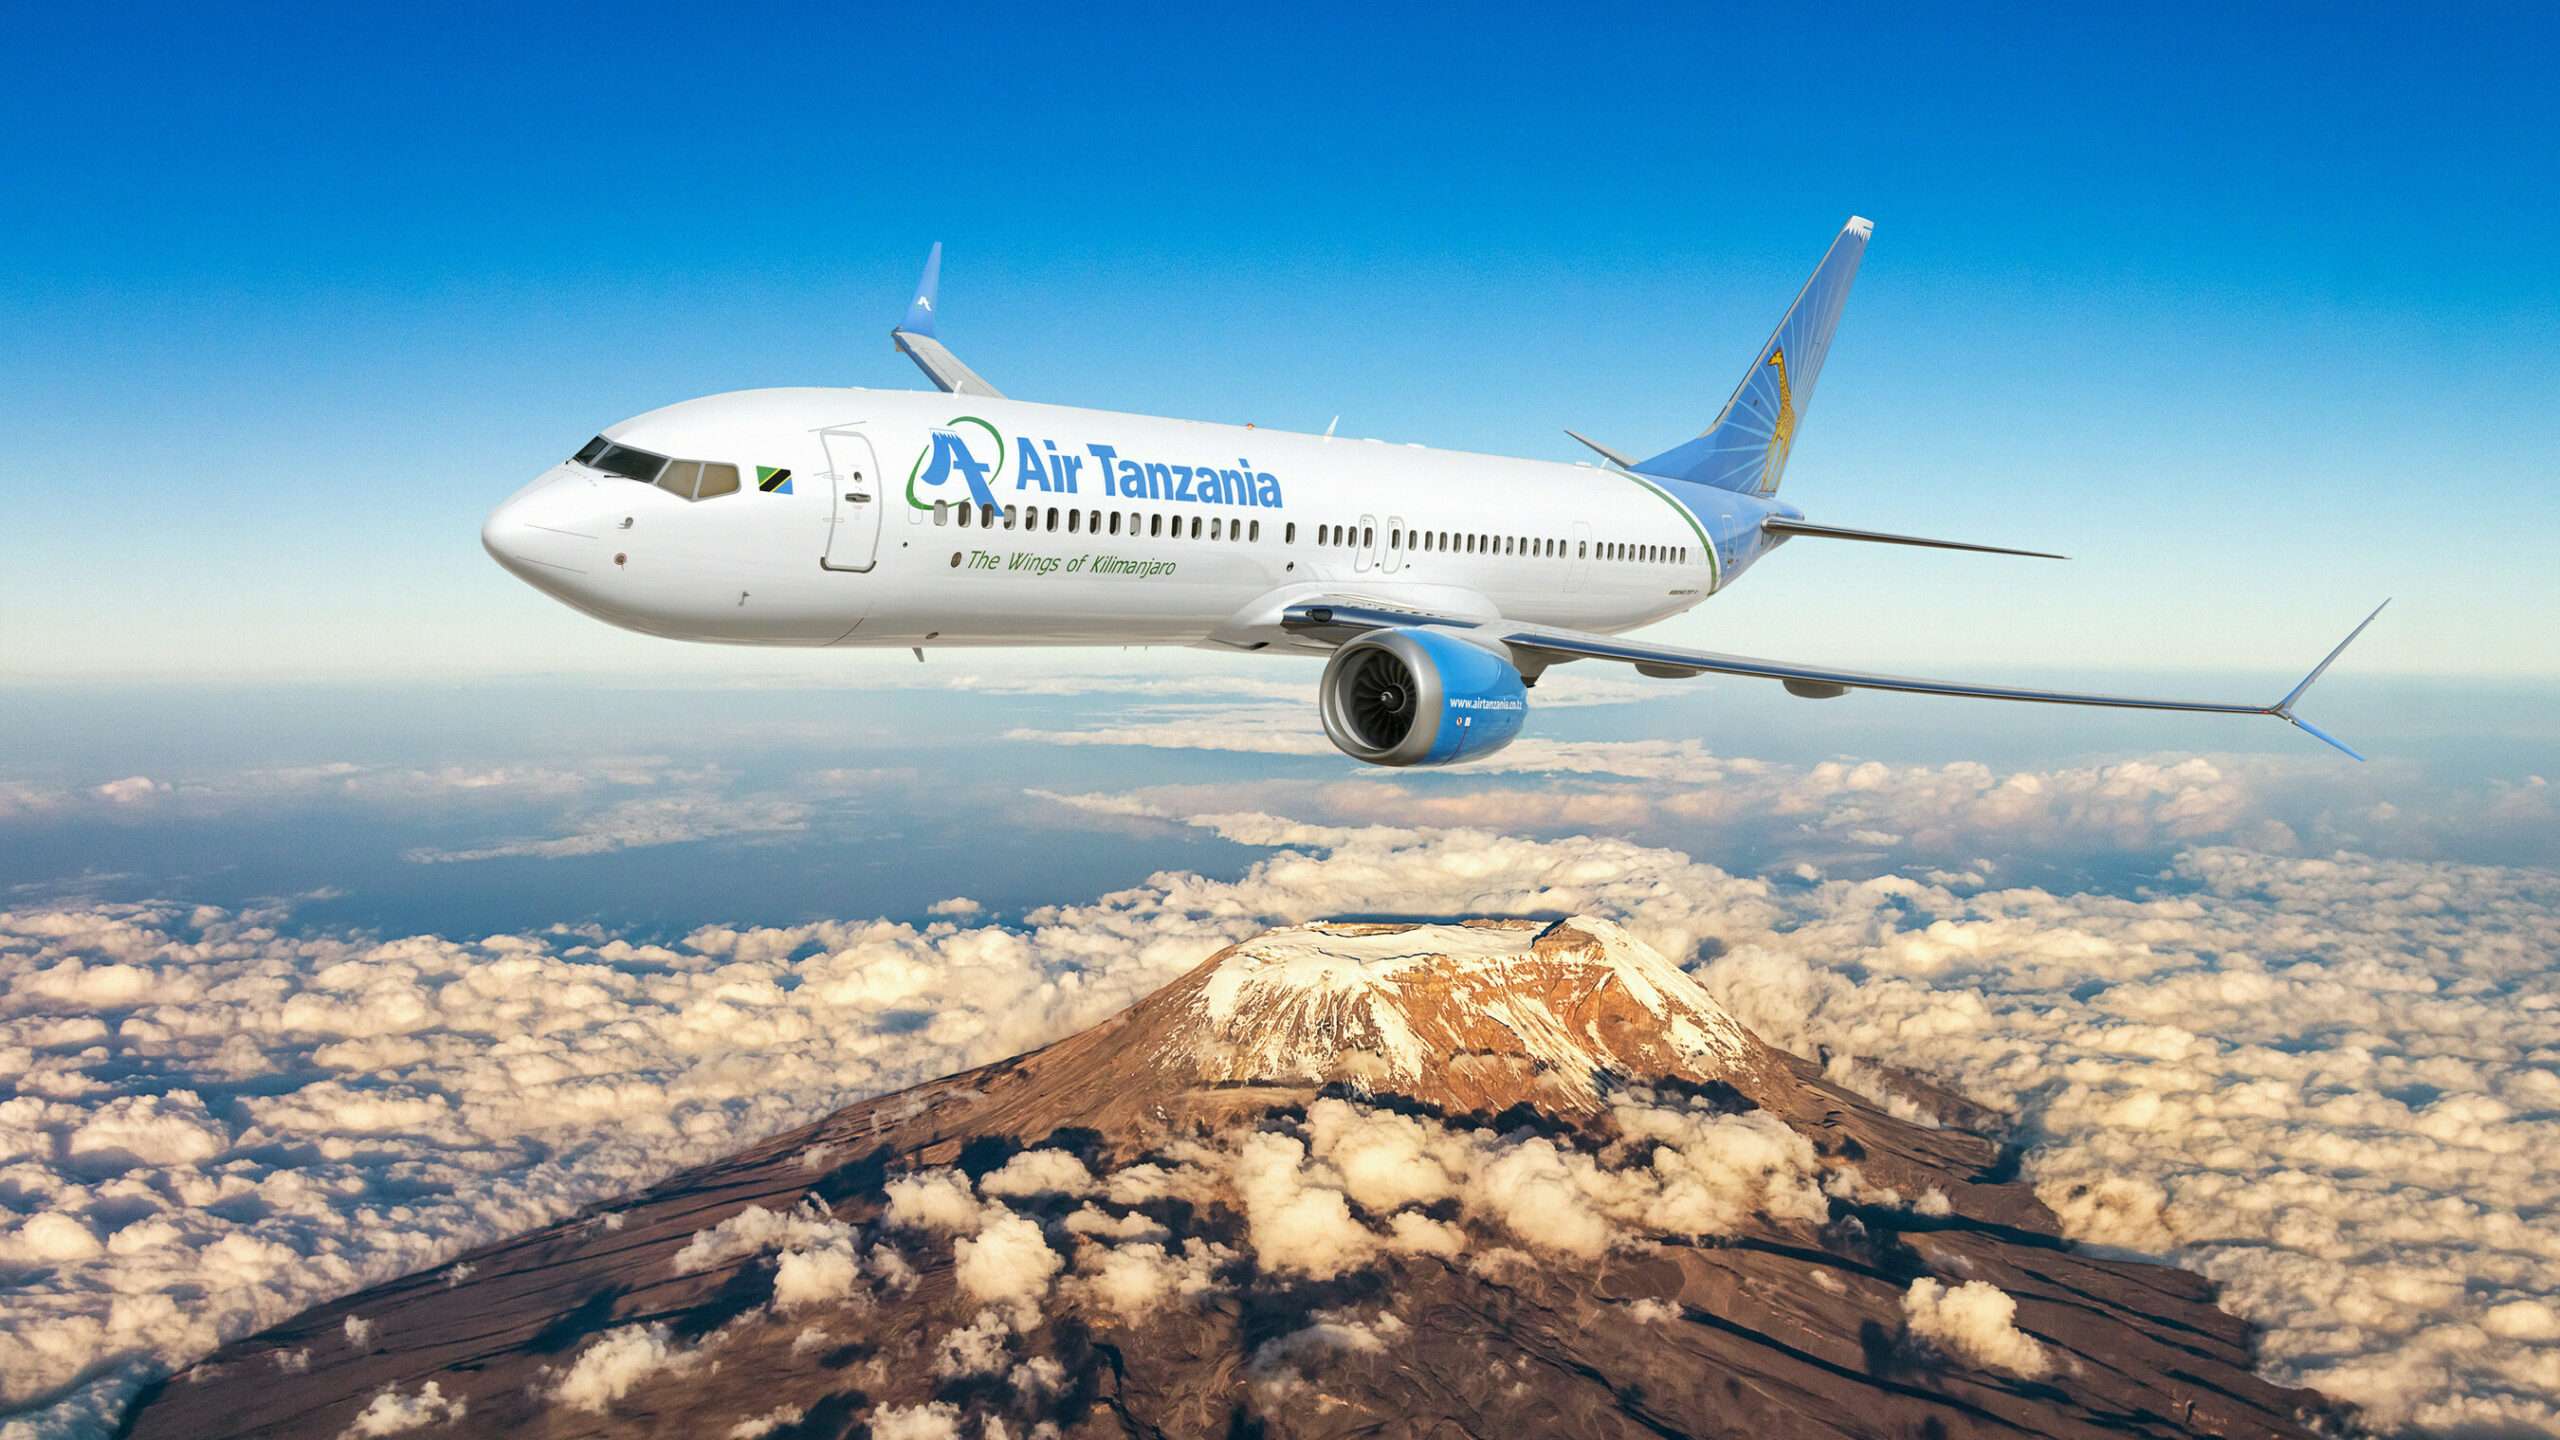 Signed, Sealed & Delivered: Air Tanzania's Boeing 737 MAX